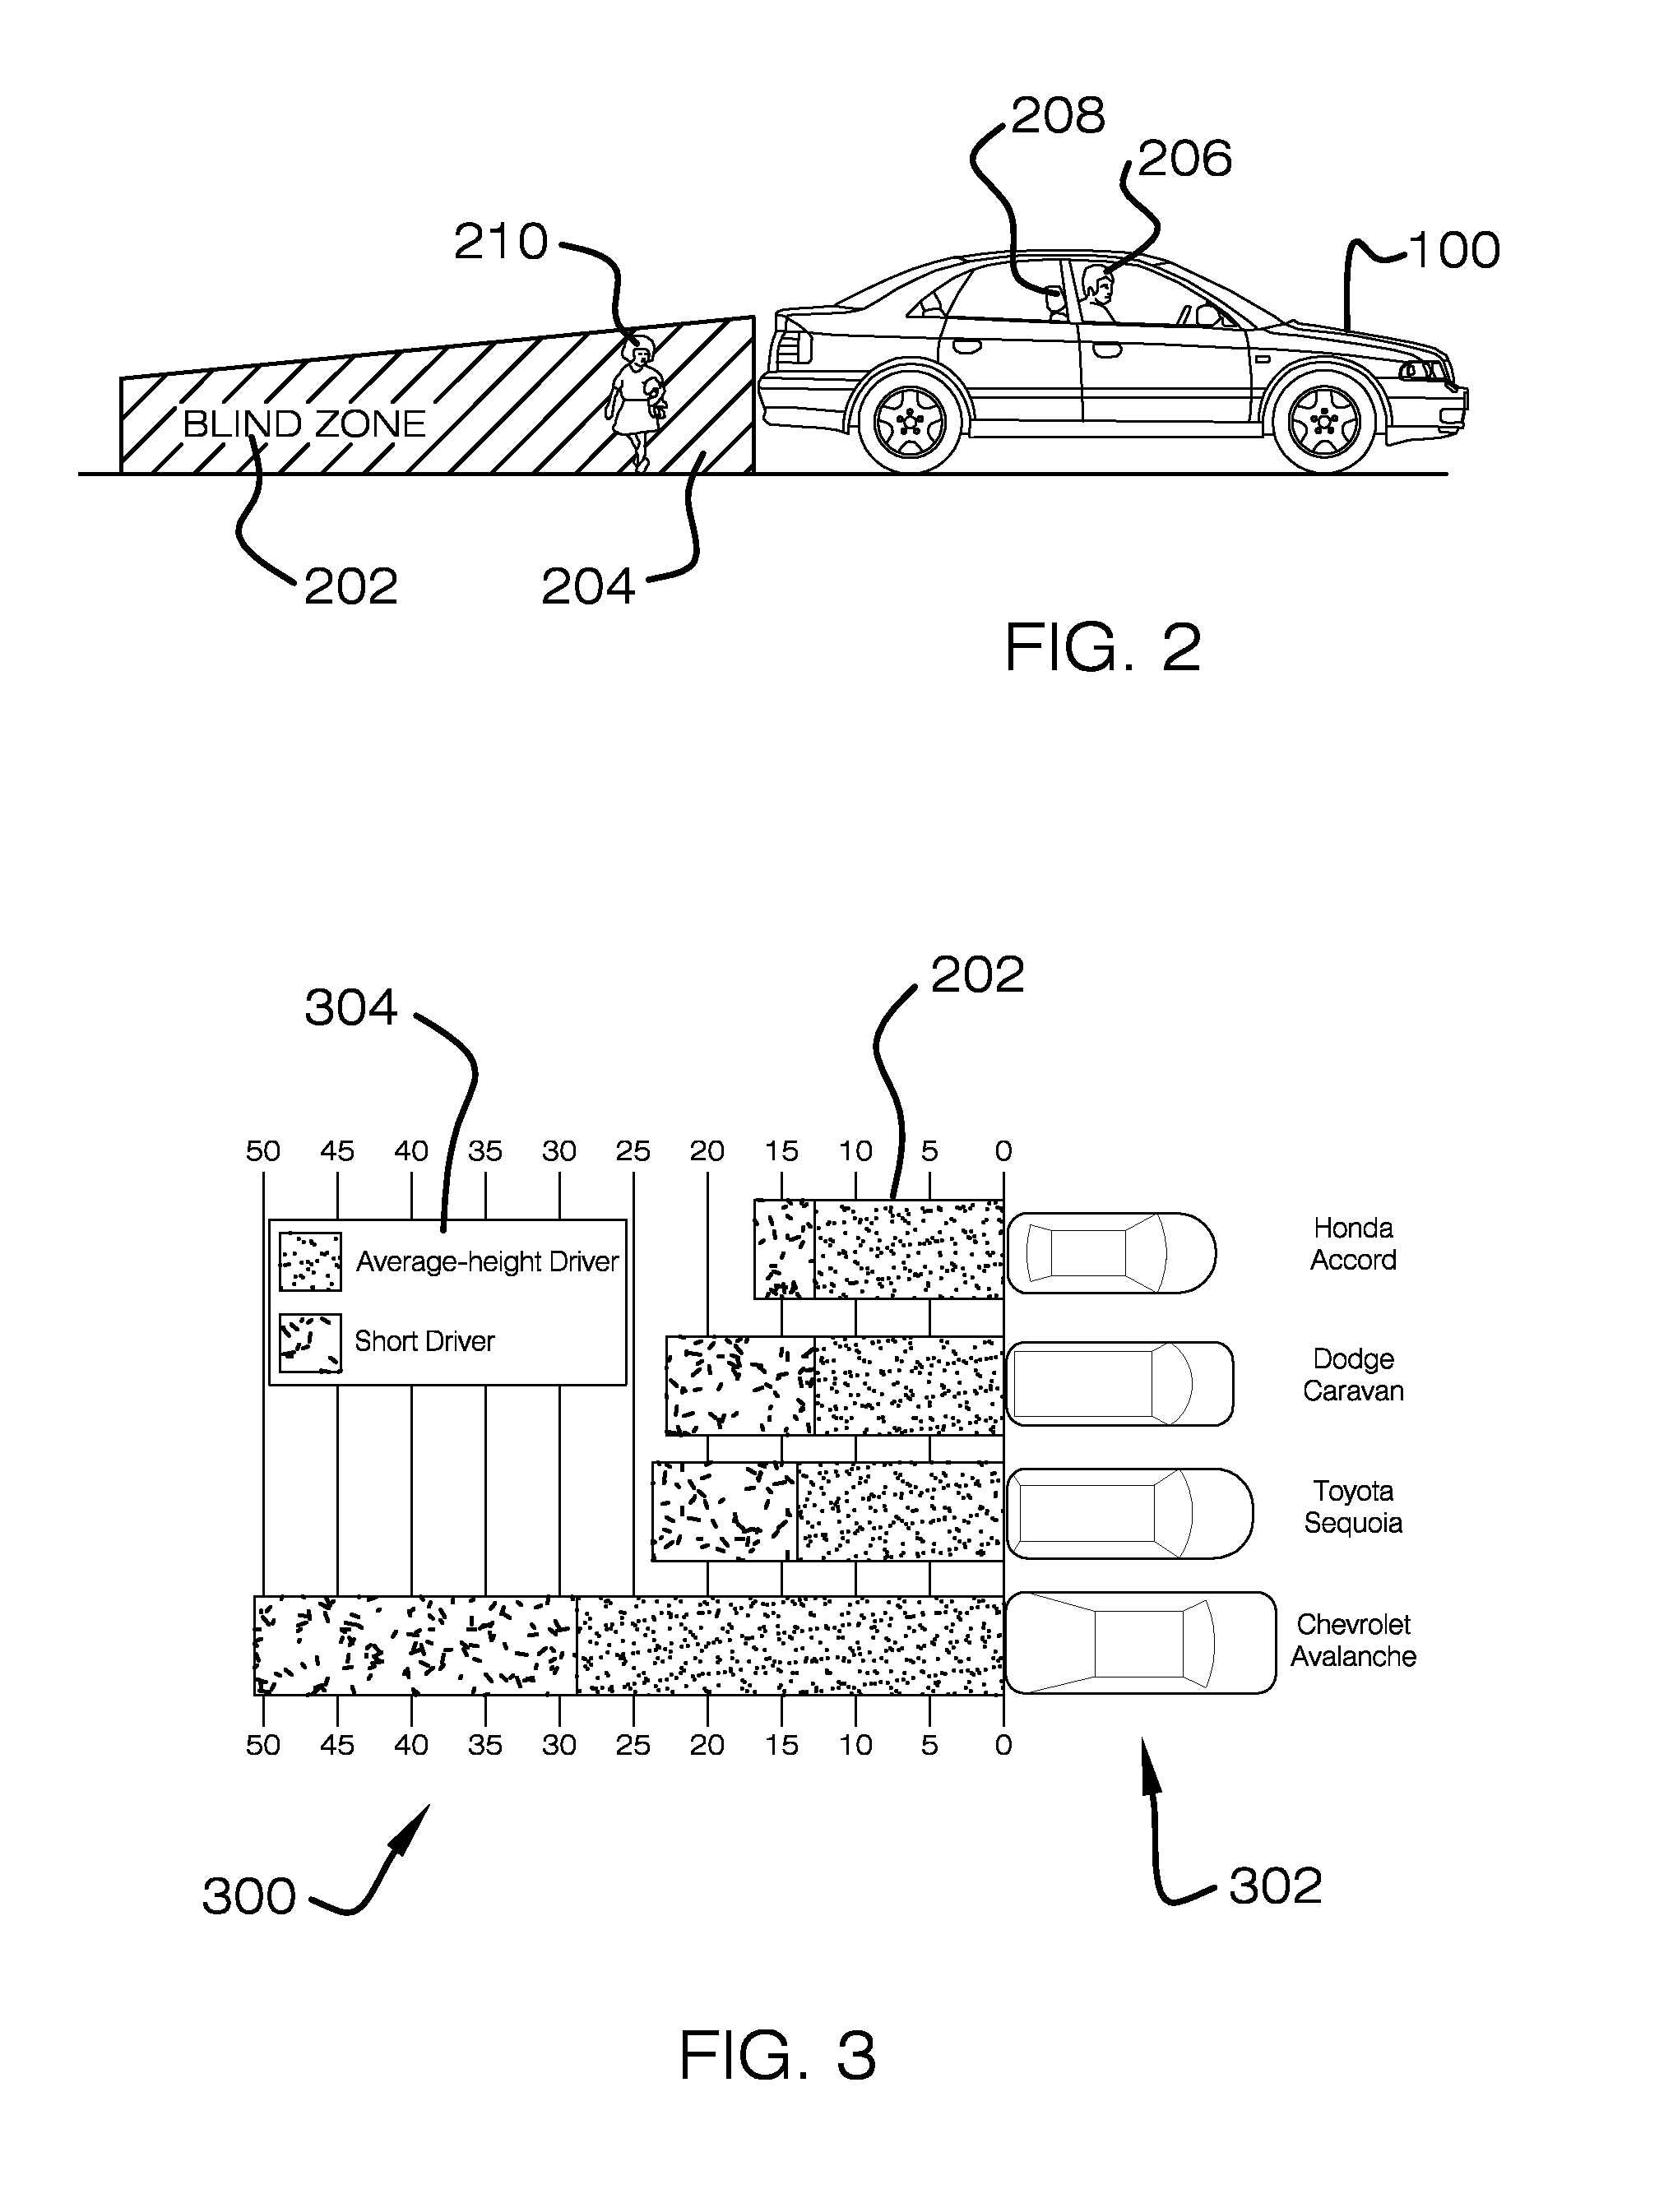 Reverse drive safety system for vehicle